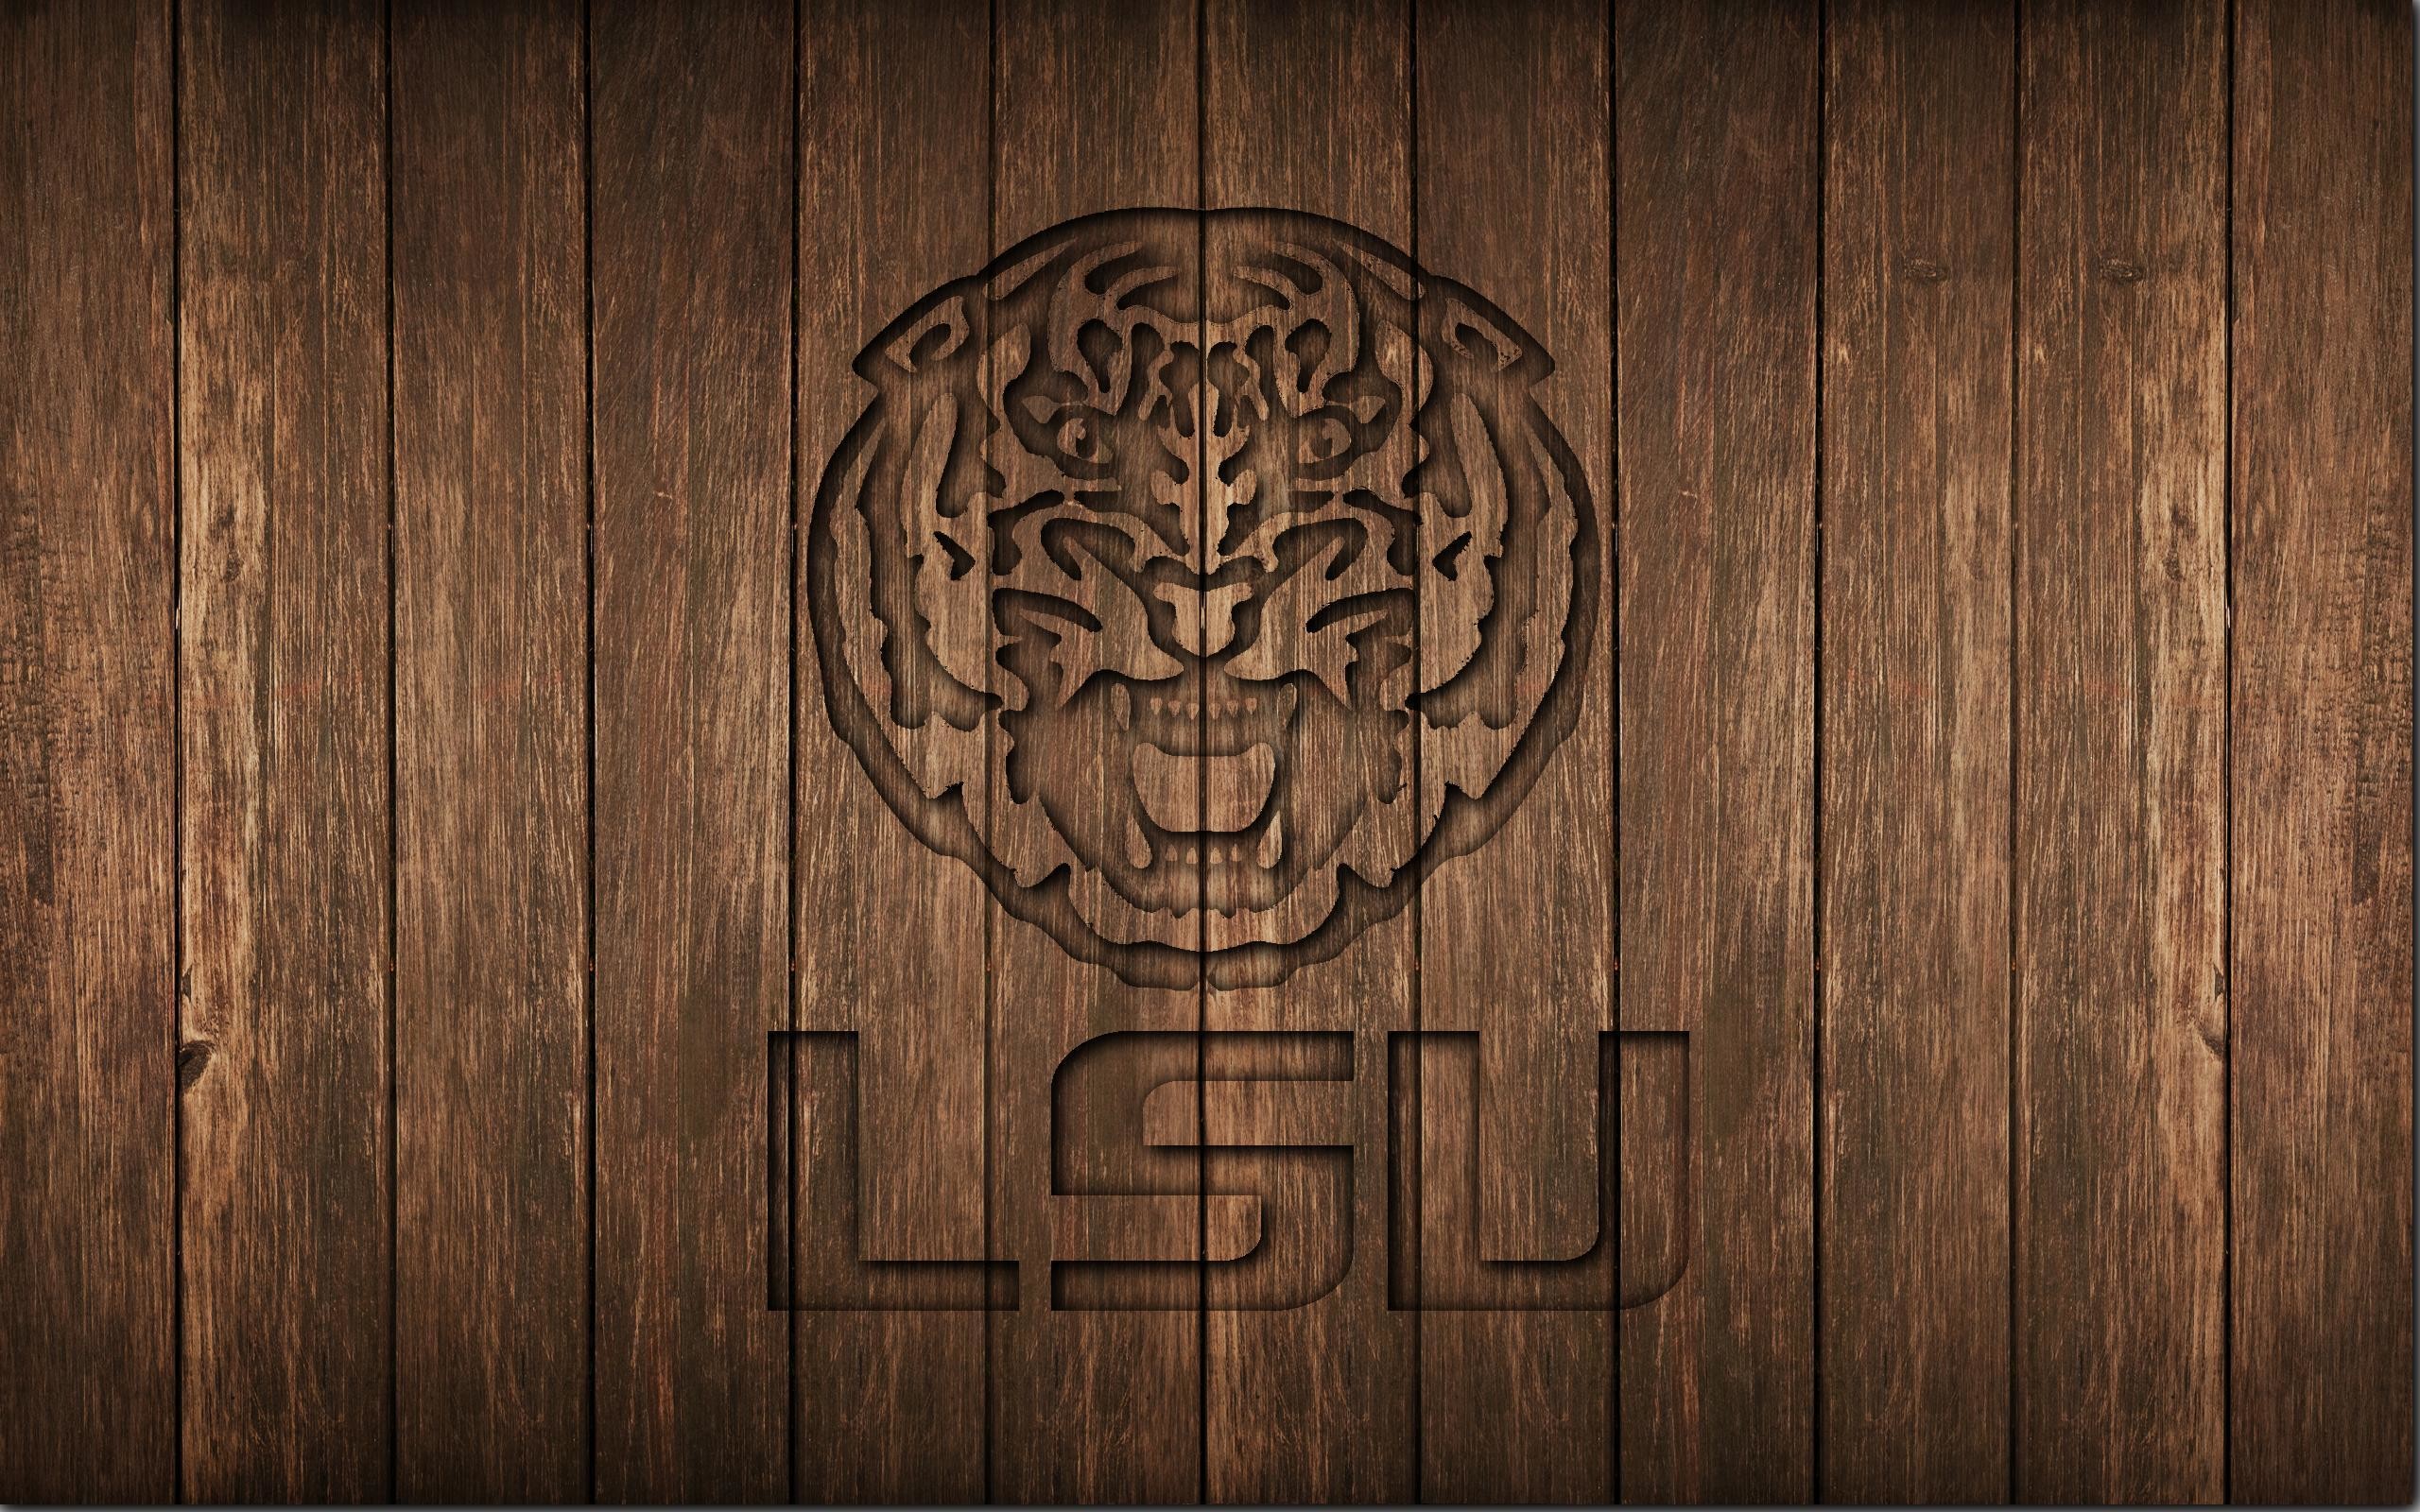 2560x1600 Another round of LSU wallpapers - Update: 2 new added .